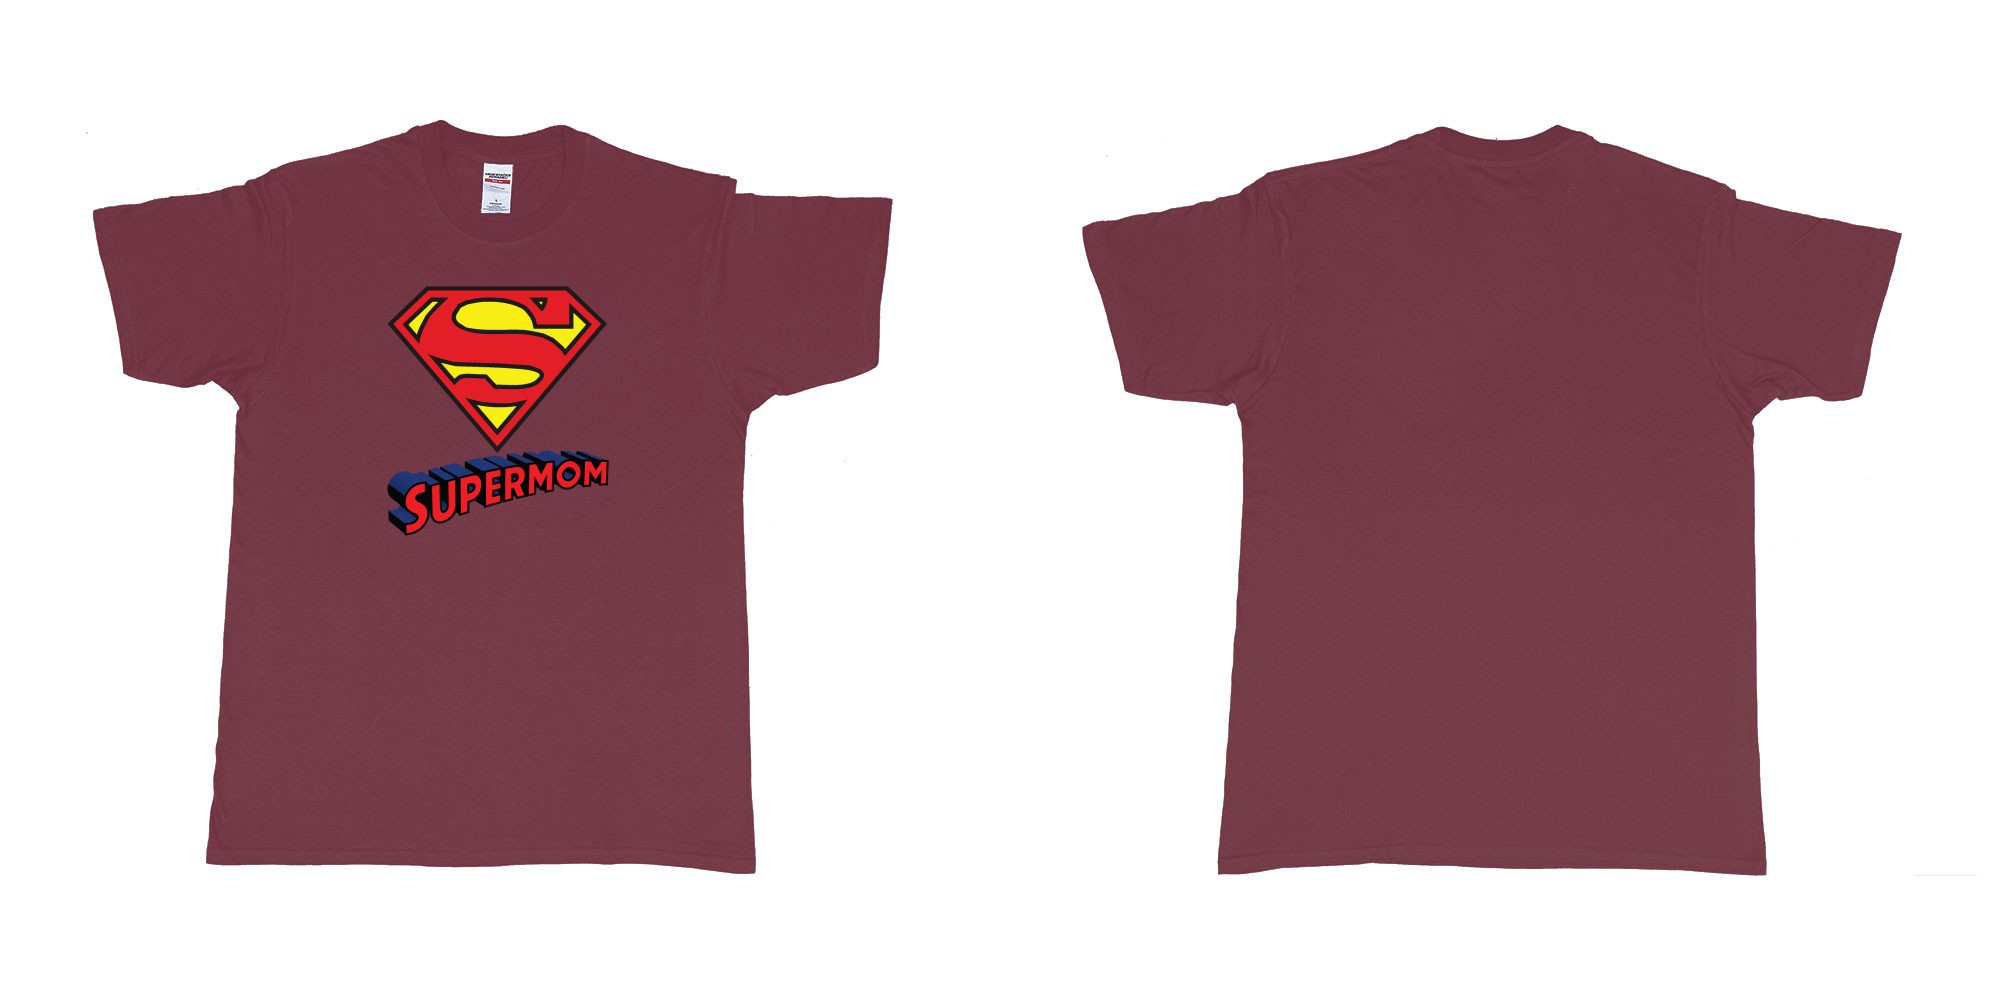 Custom tshirt design superman logo with own custom text print bali in fabric color marron choice your own text made in Bali by The Pirate Way